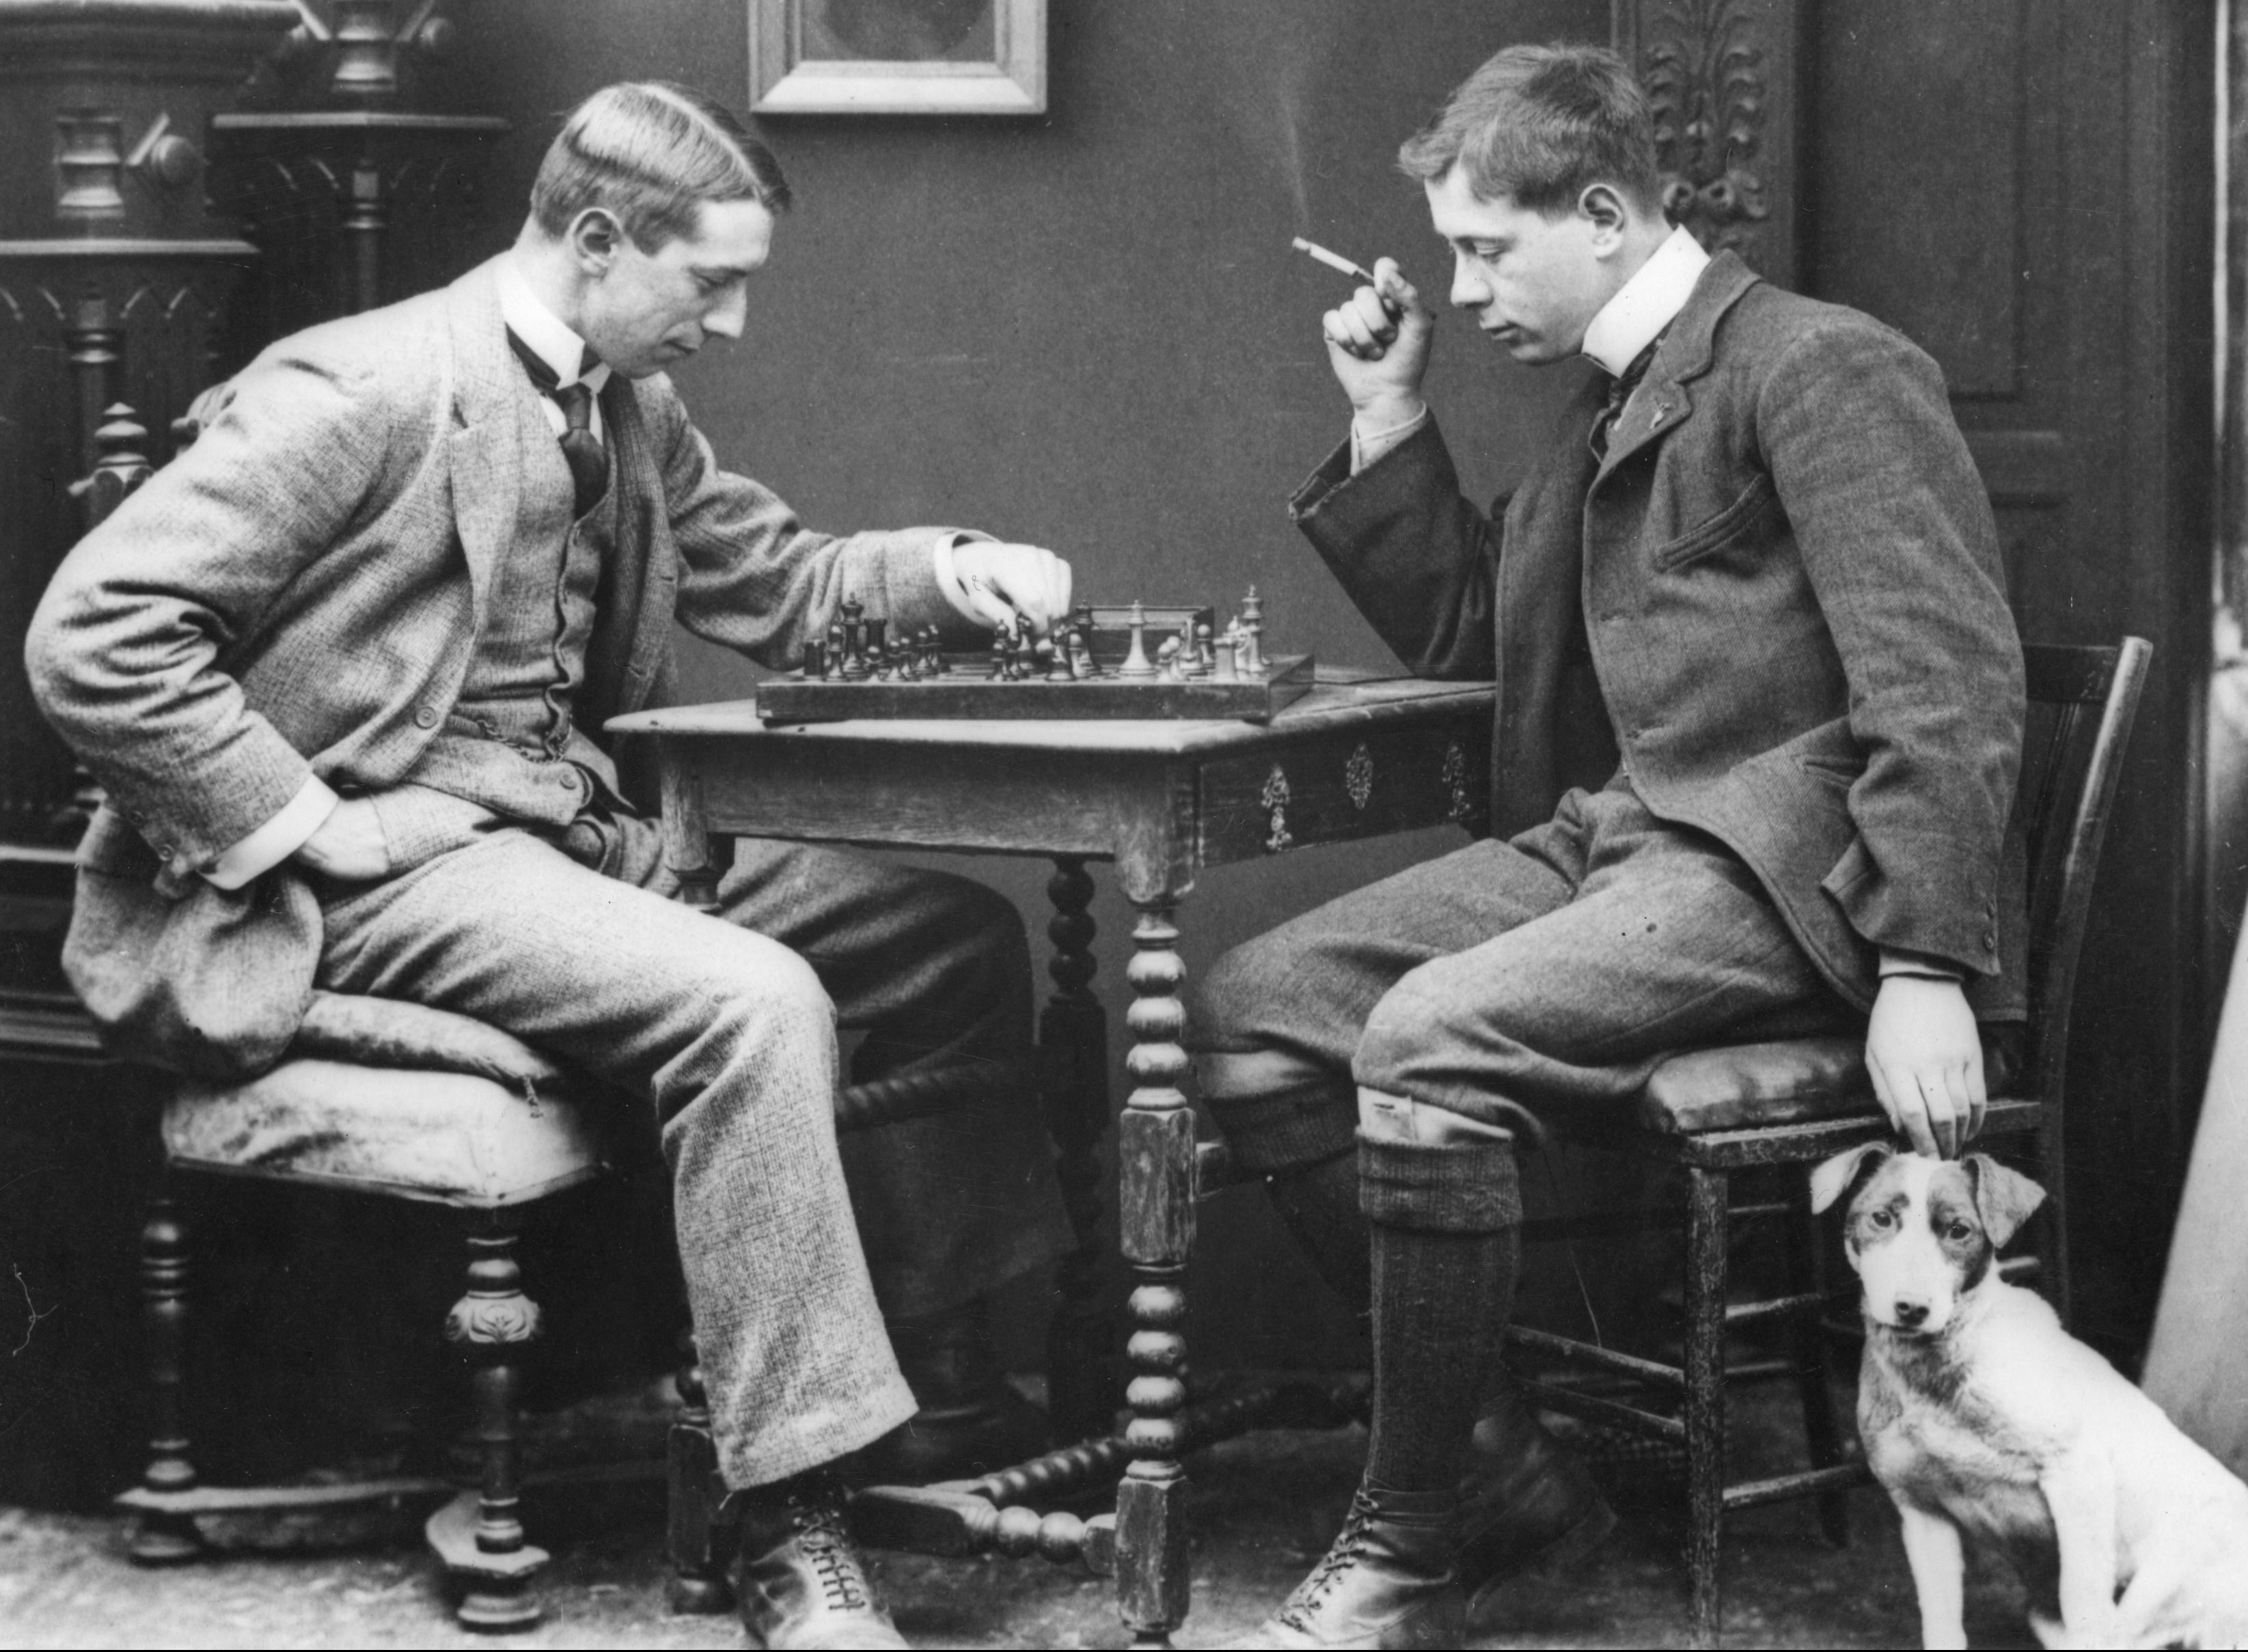 circa 1885: A couple of men playing a leisurely game of chess. The photo is in black in white. The men are dressed in suits. One of them is also petting a dog.